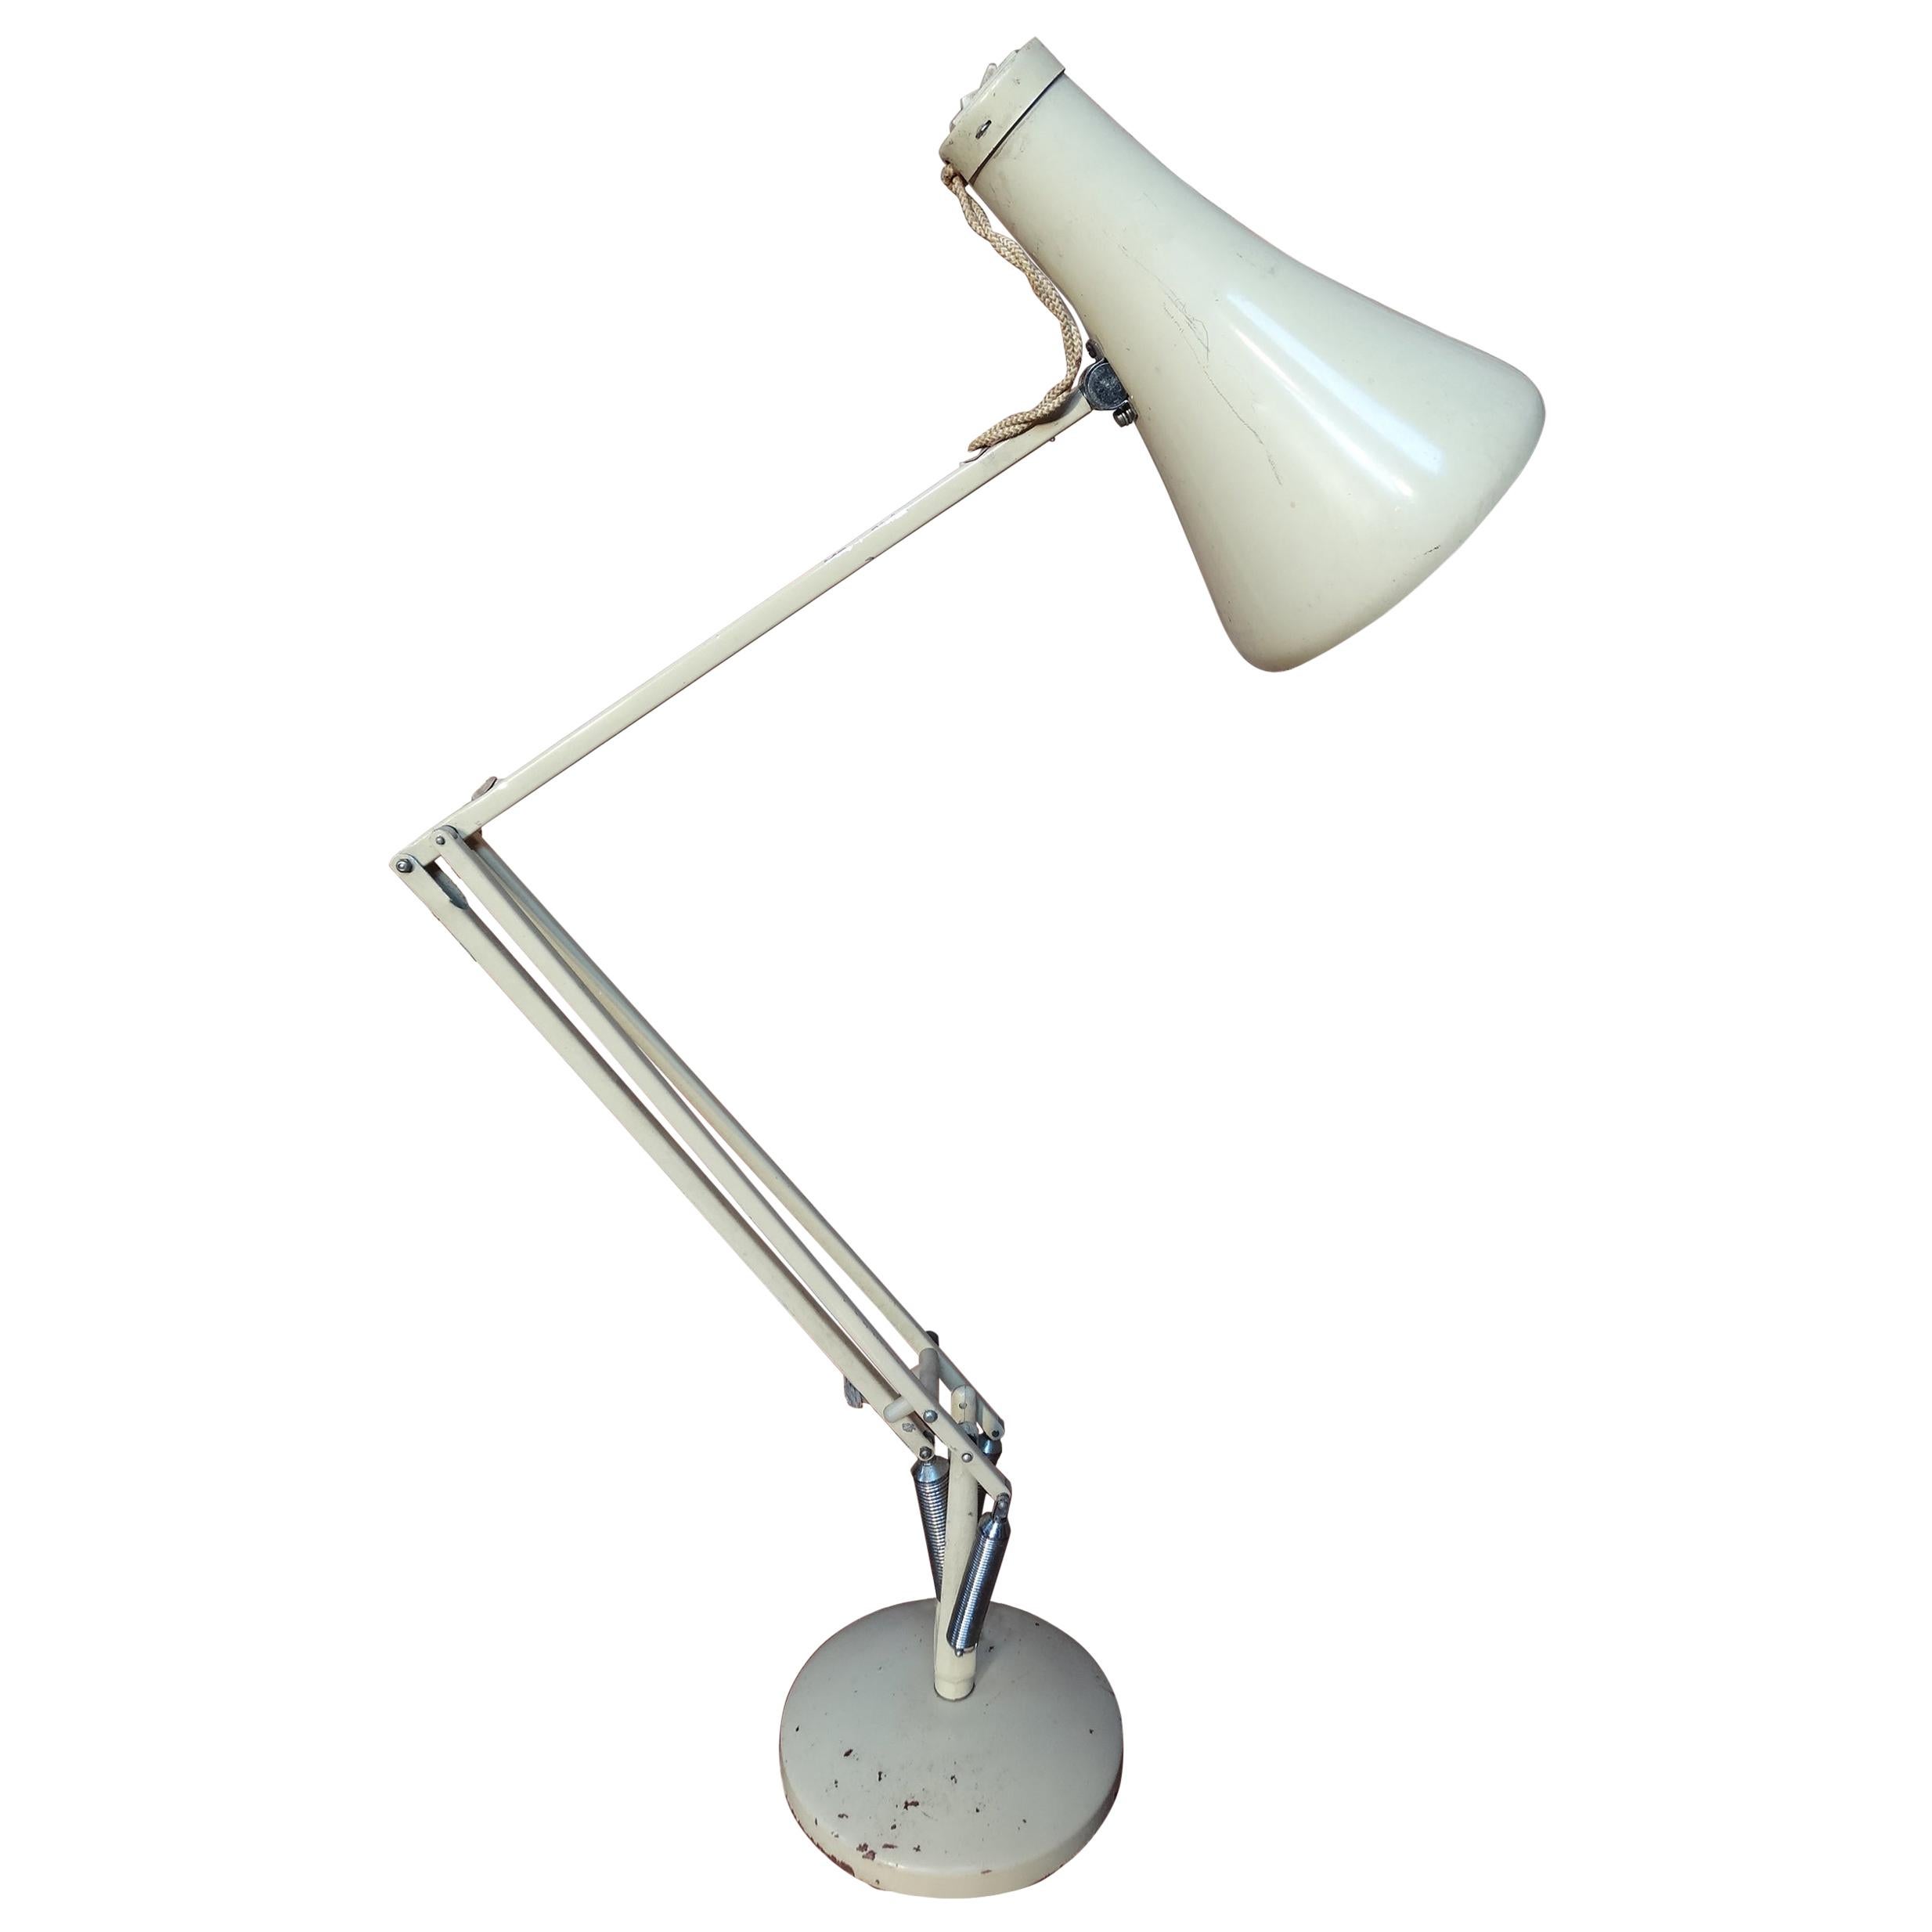 Early Off White Anglepoise Lamp Designed George Carwardine for Herbert Terry Sale at 1stDibs | george carwardine 1938, herbert terry anglepoise lamp